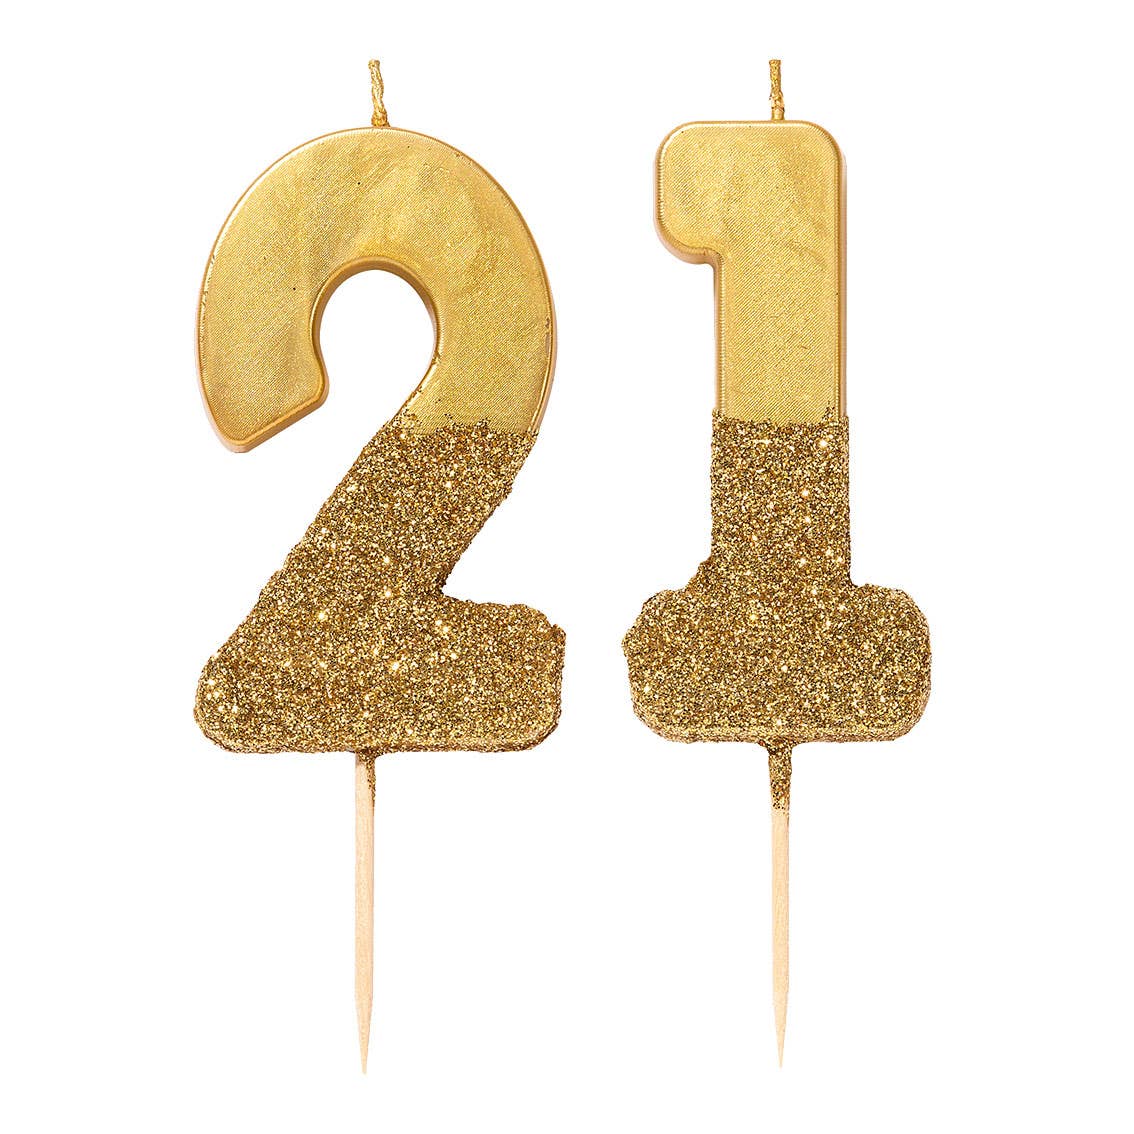 Gold Glitter Number Candle - Number 2